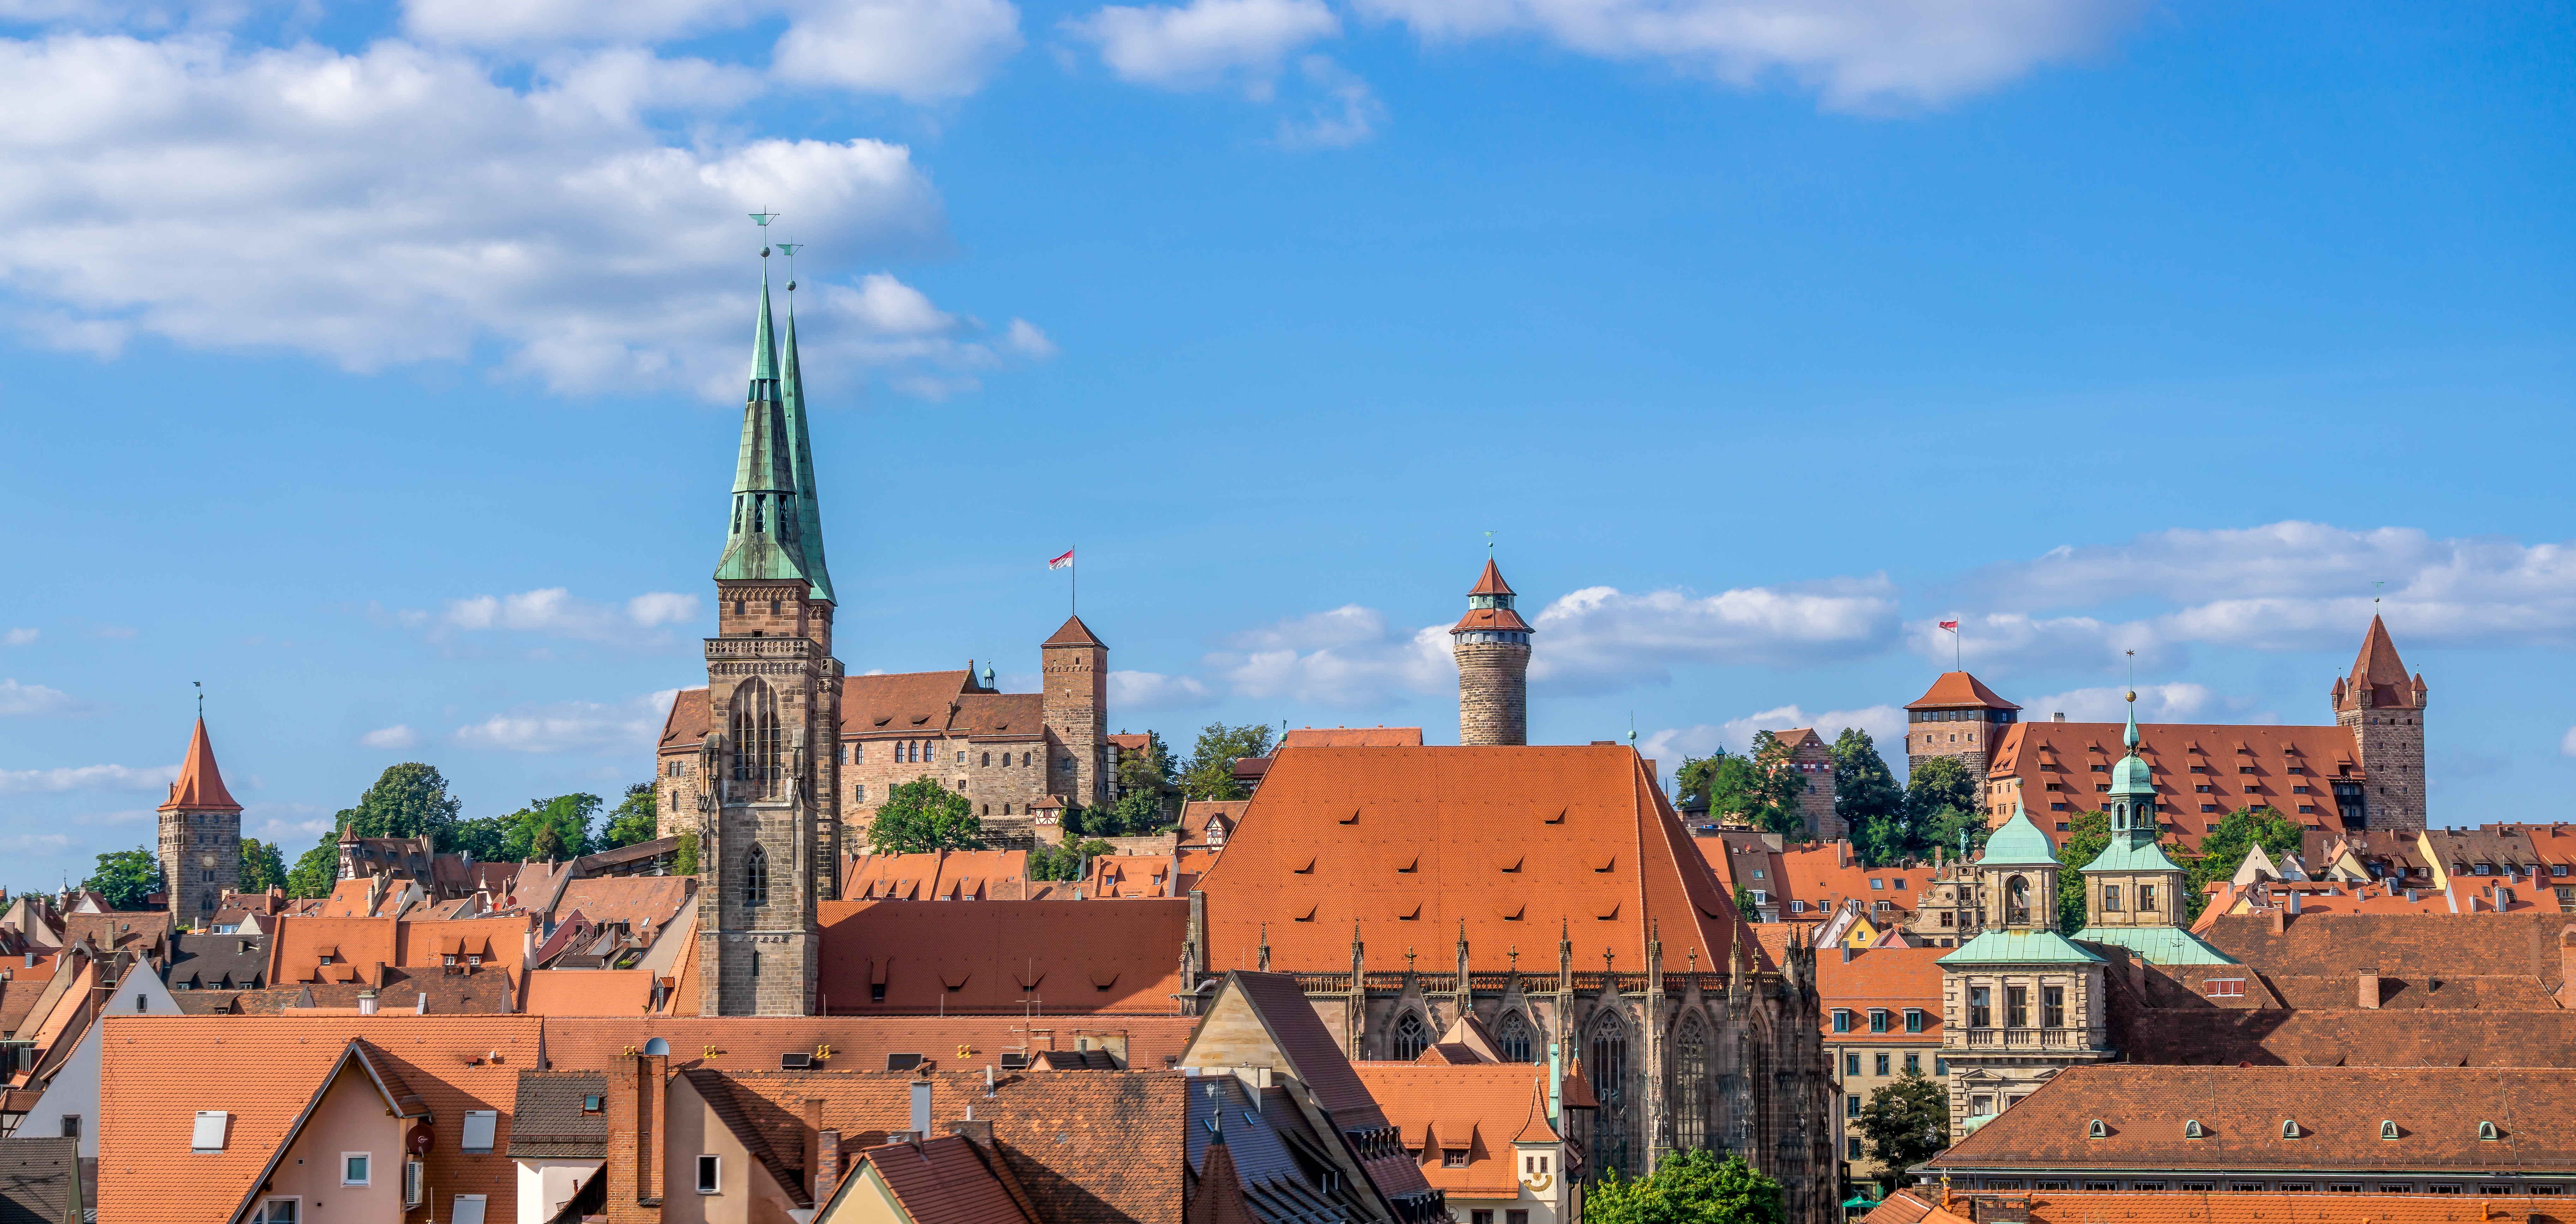 city of nuremberg with castle, chruches and roofs